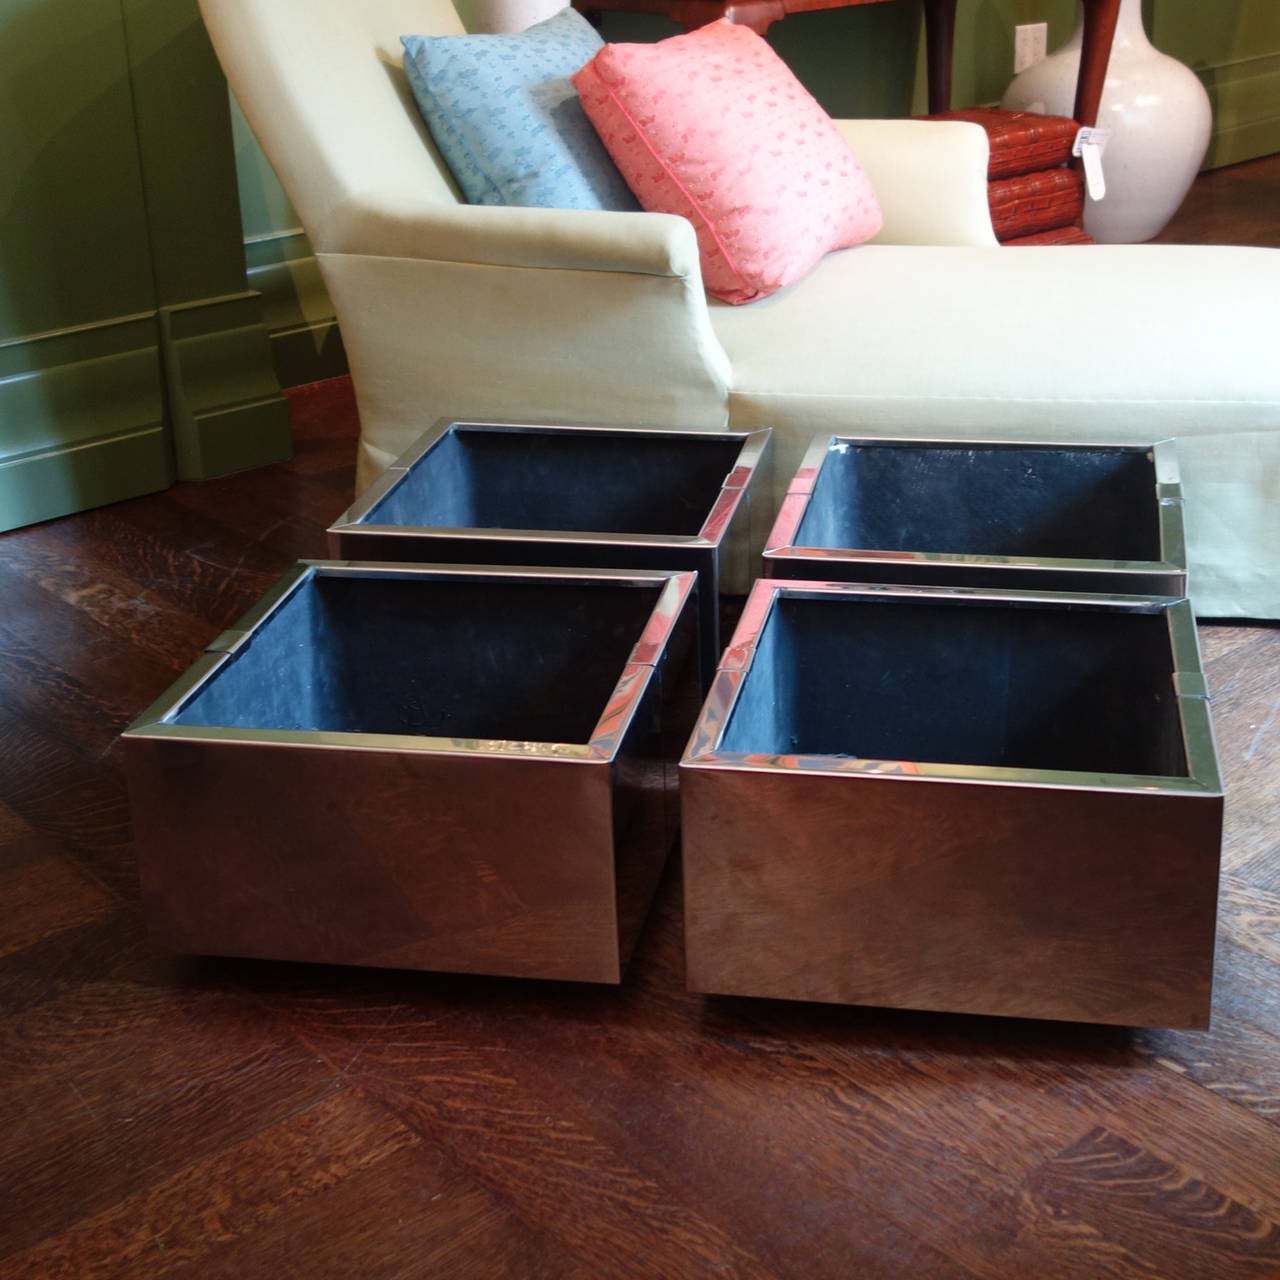 Set of four French 1970s chrome planters. Chrome frames cover solid cast body which sit on small inset feet for an overall cantilever effect. Sleek profile with cap detail.